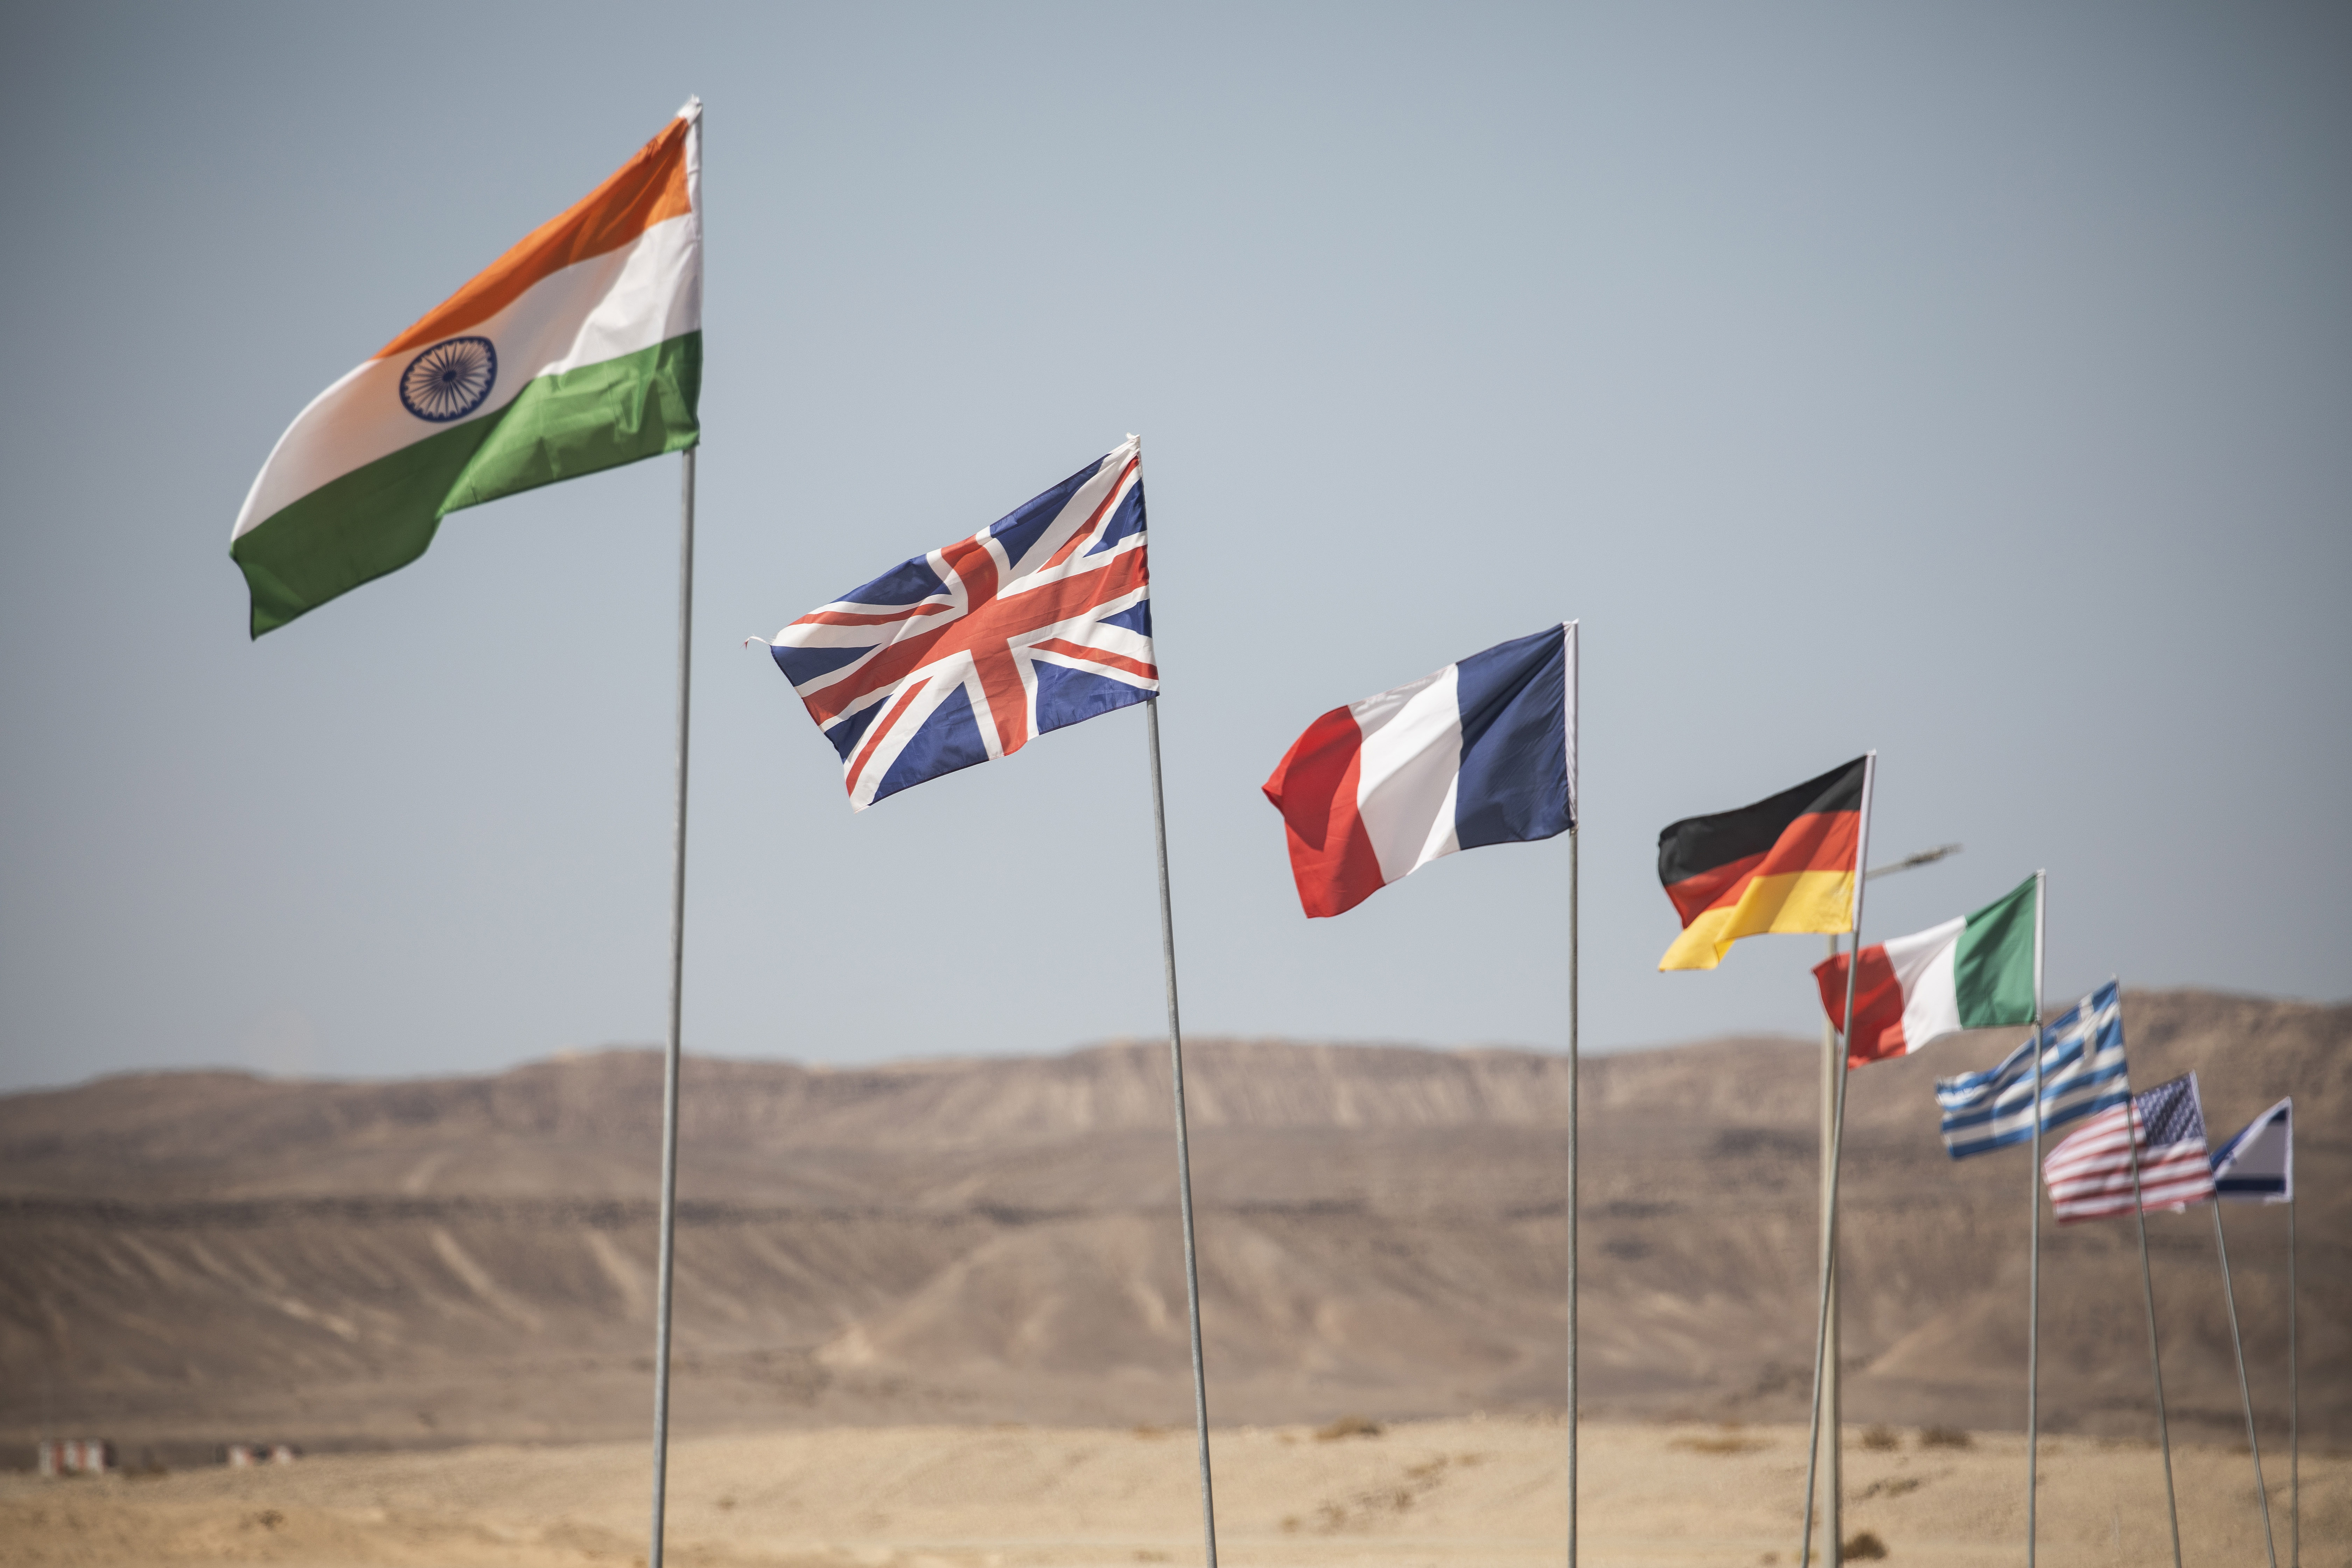 The flags of India, UK, France, Germany, Italy, Greece, USA and Israel flying in the wind.